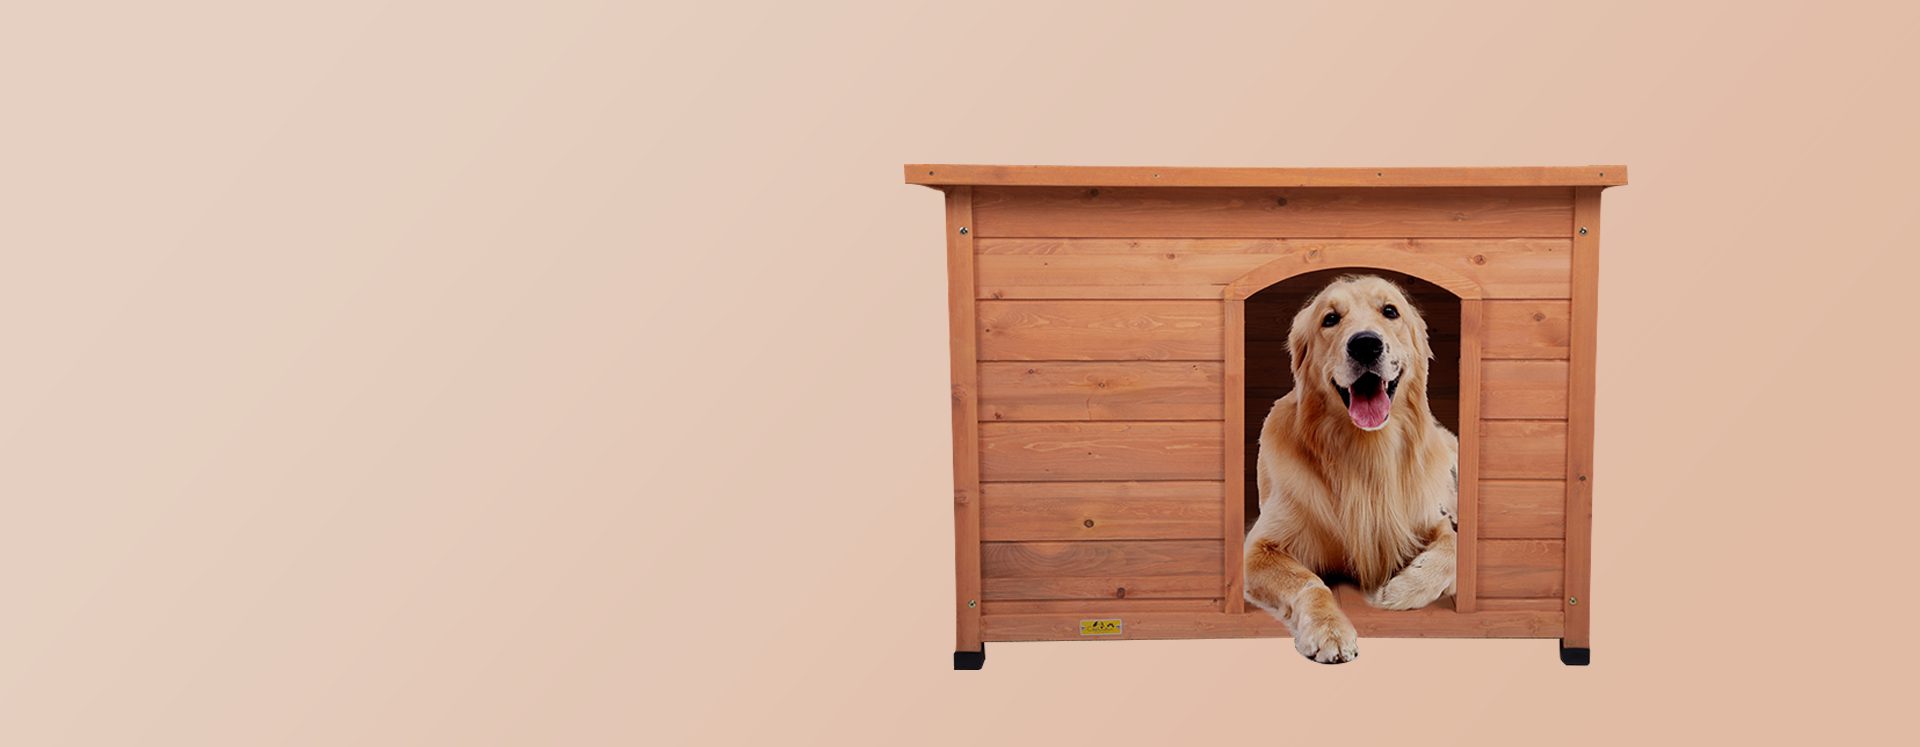 The Best Guide To Choose A Proper Dog House lil doge Dog blogs